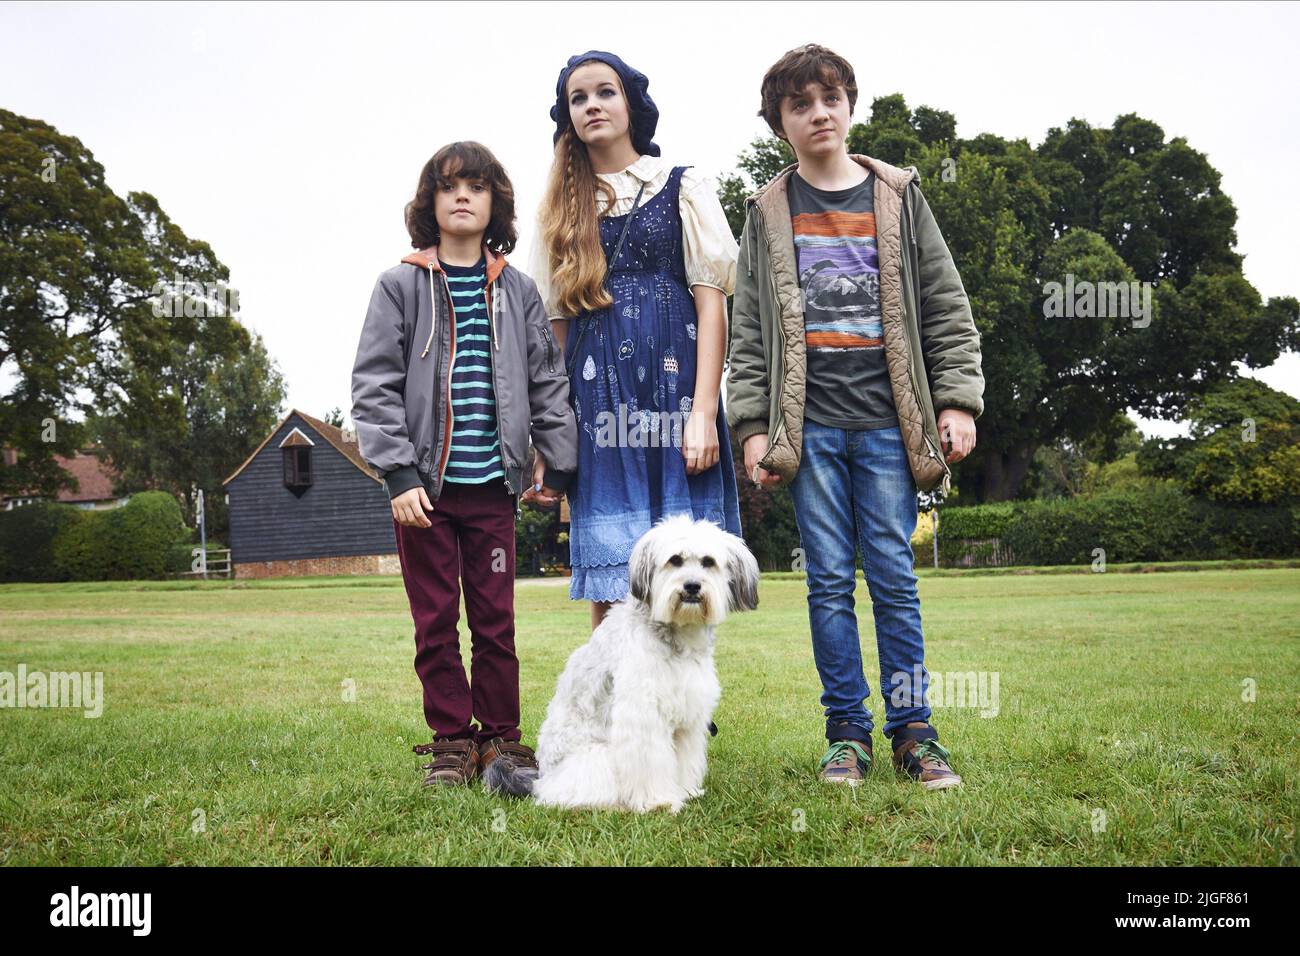 KNIGHTS,MEIKLE-SMALL,PUDSEY,WHITE, PUDSEY THE DOG: THE MOVIE, 2014 Stock Photo